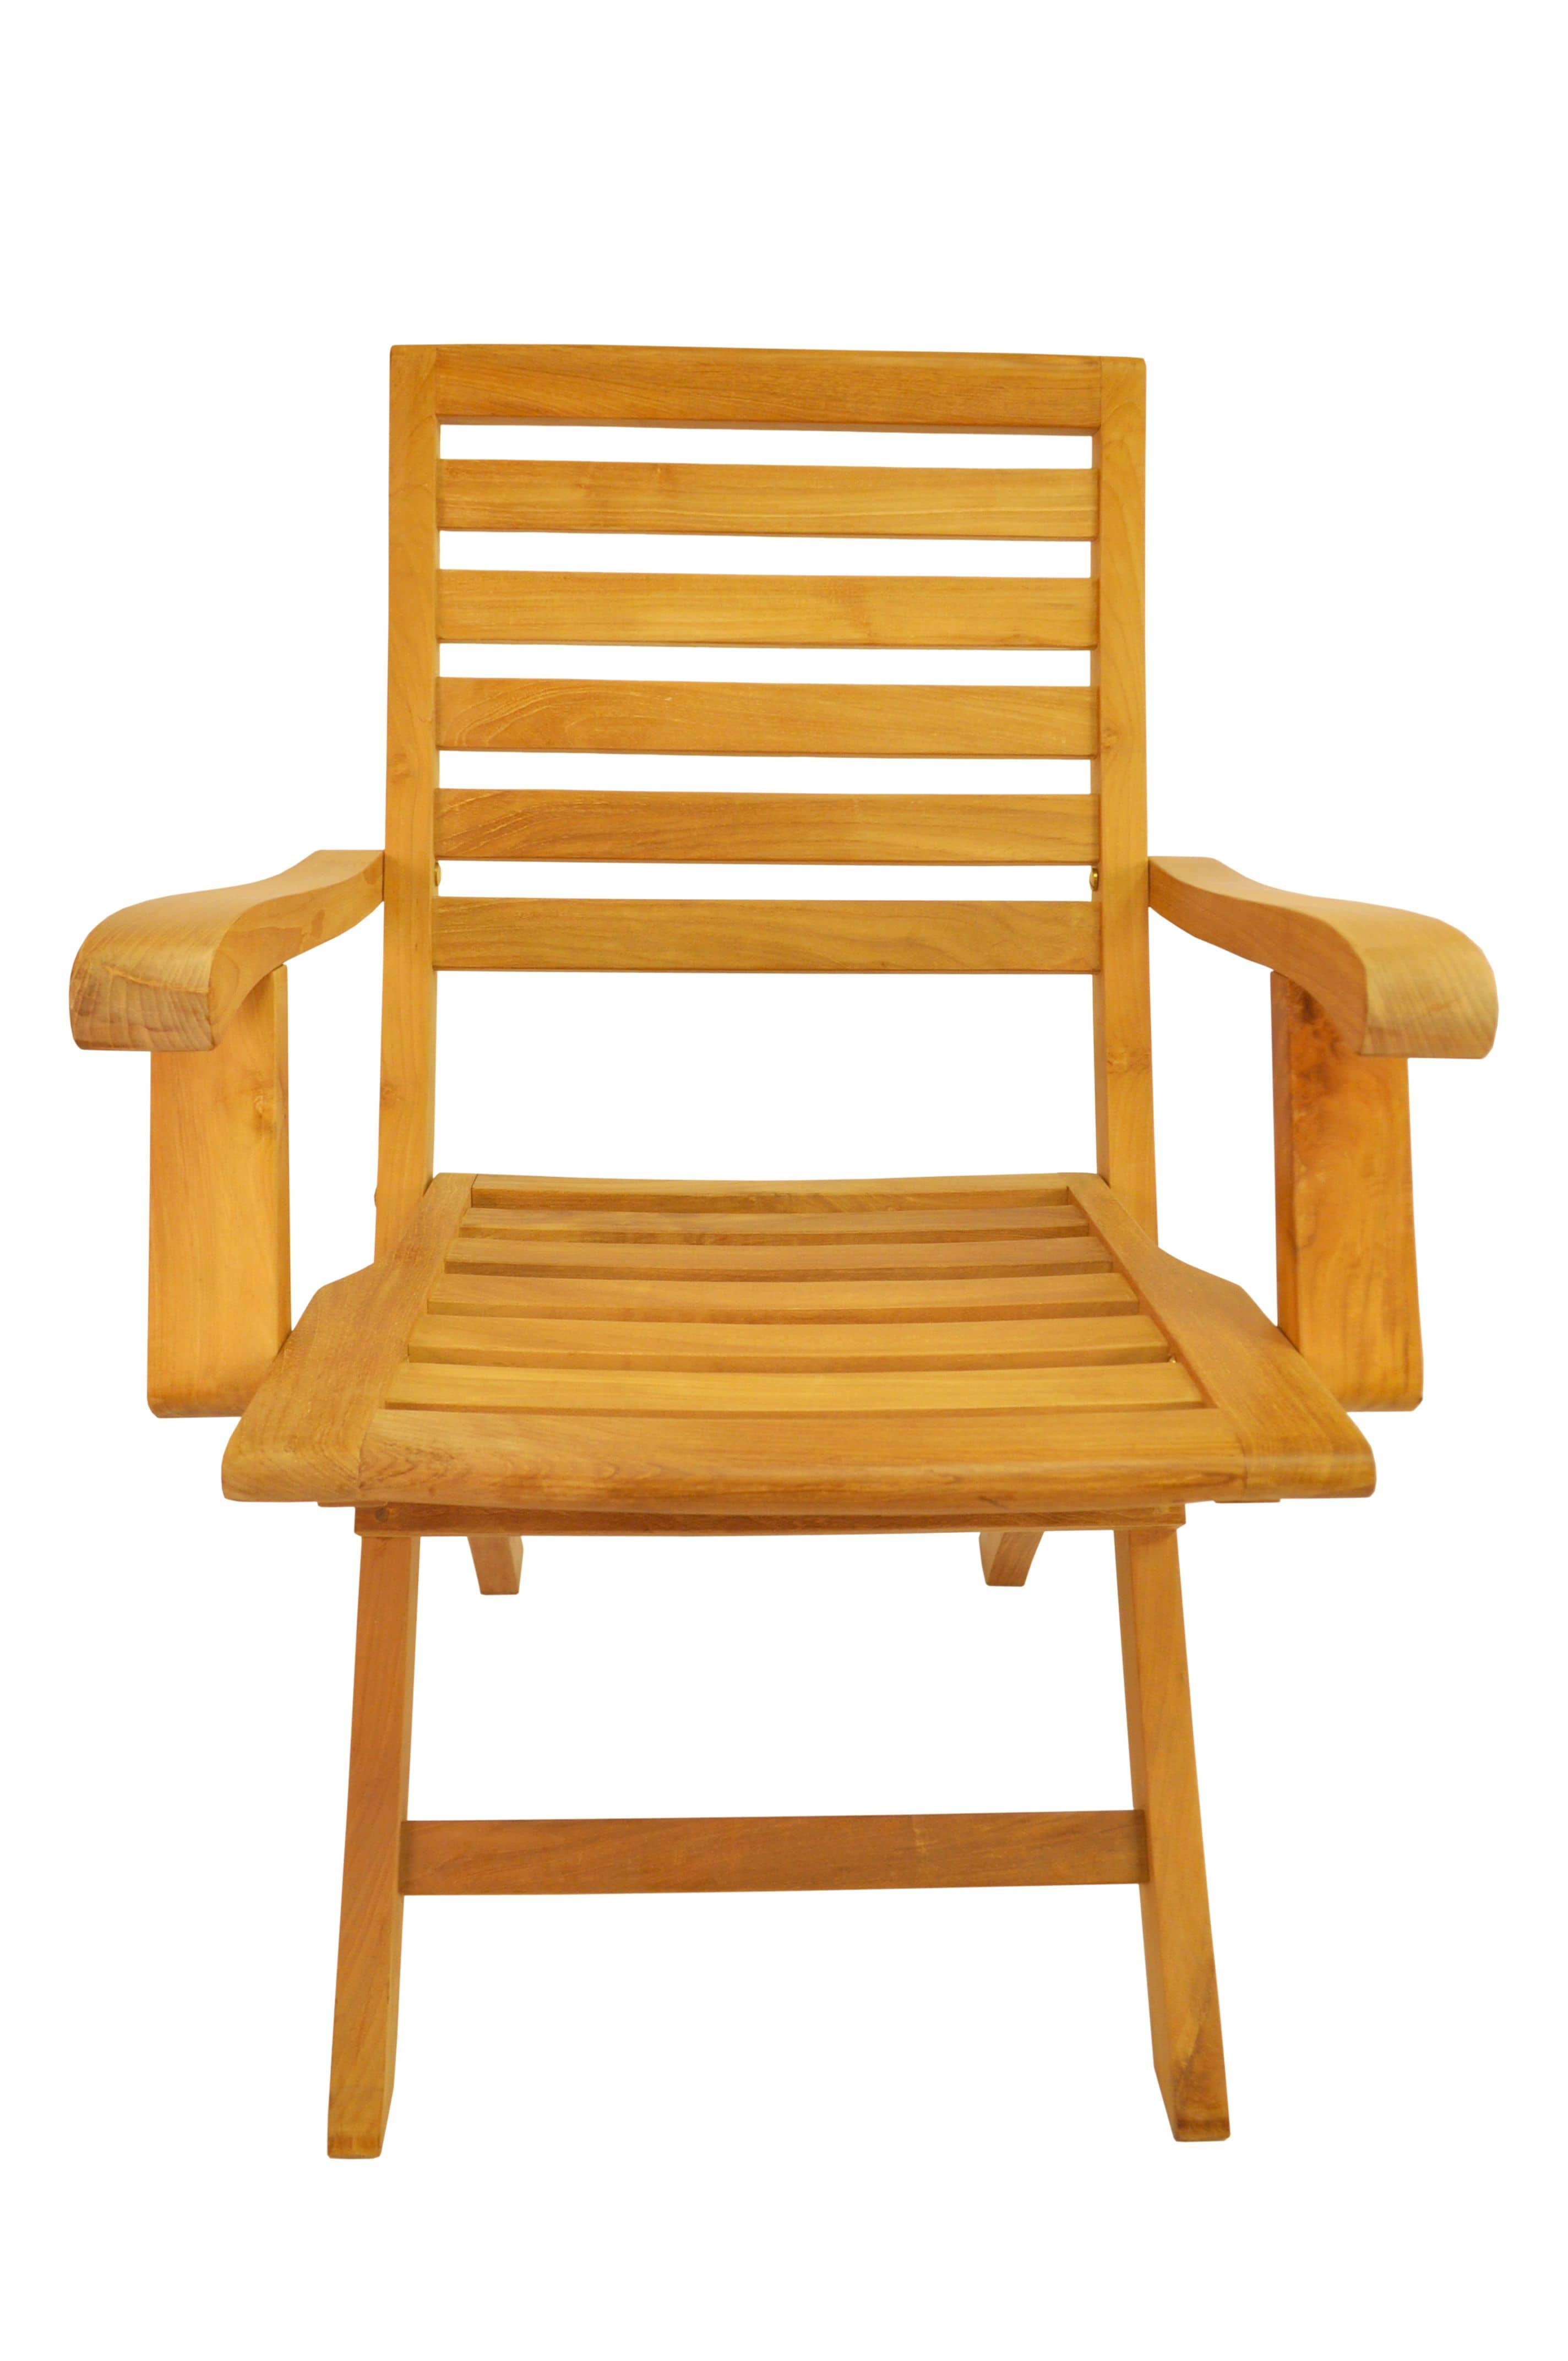 Anderson Teak Outdoor Folding Chairs Anderson Teak Andrew Folding Armchair (sell & price per 2 chairs only)